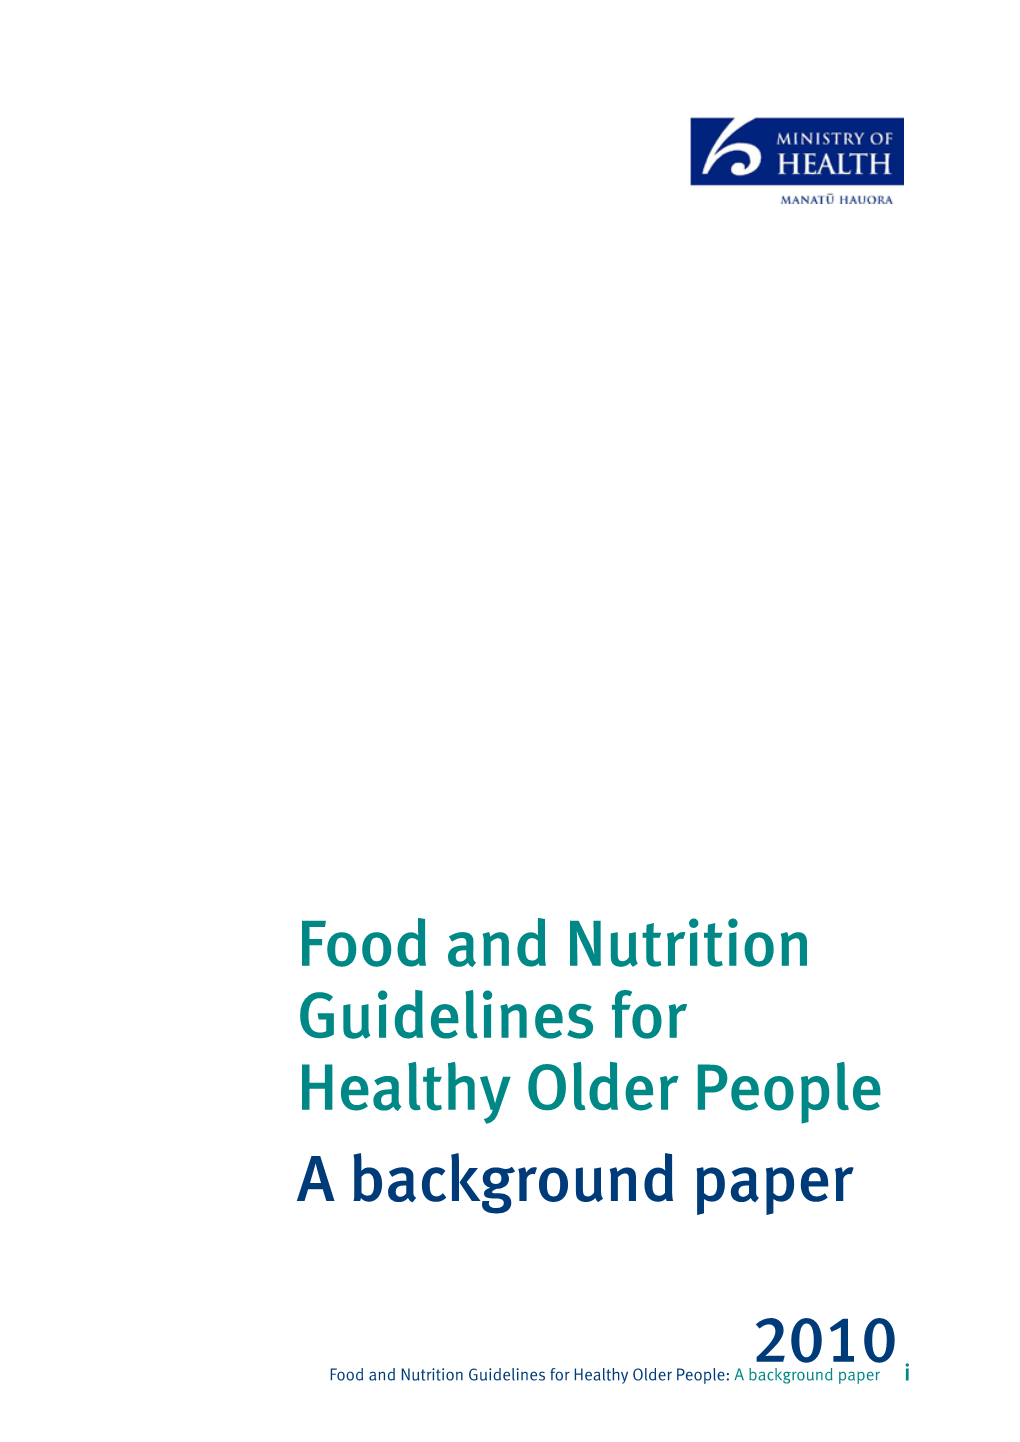 Food and Nutrition Guidelines for Healthy Older People a Background Paper